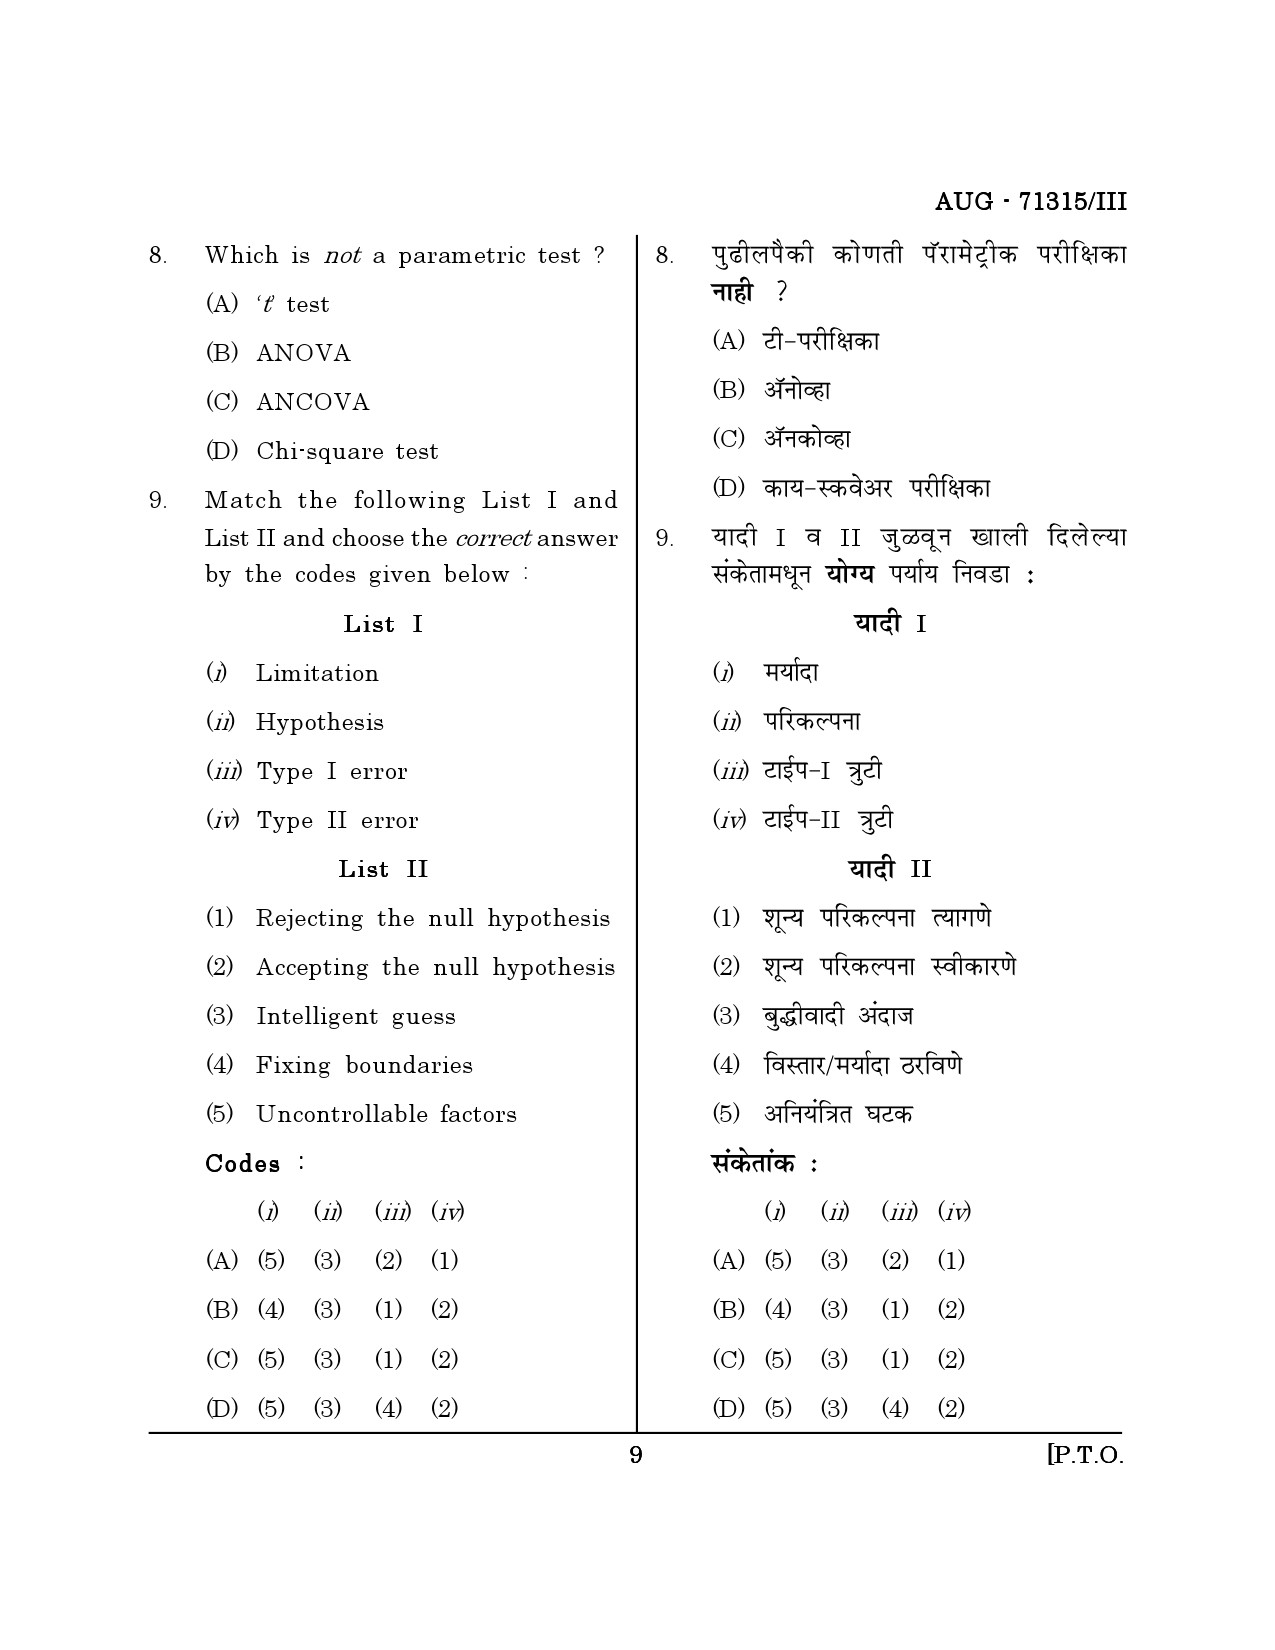 Maharashtra SET Physical Education Question Paper III August 2015 8